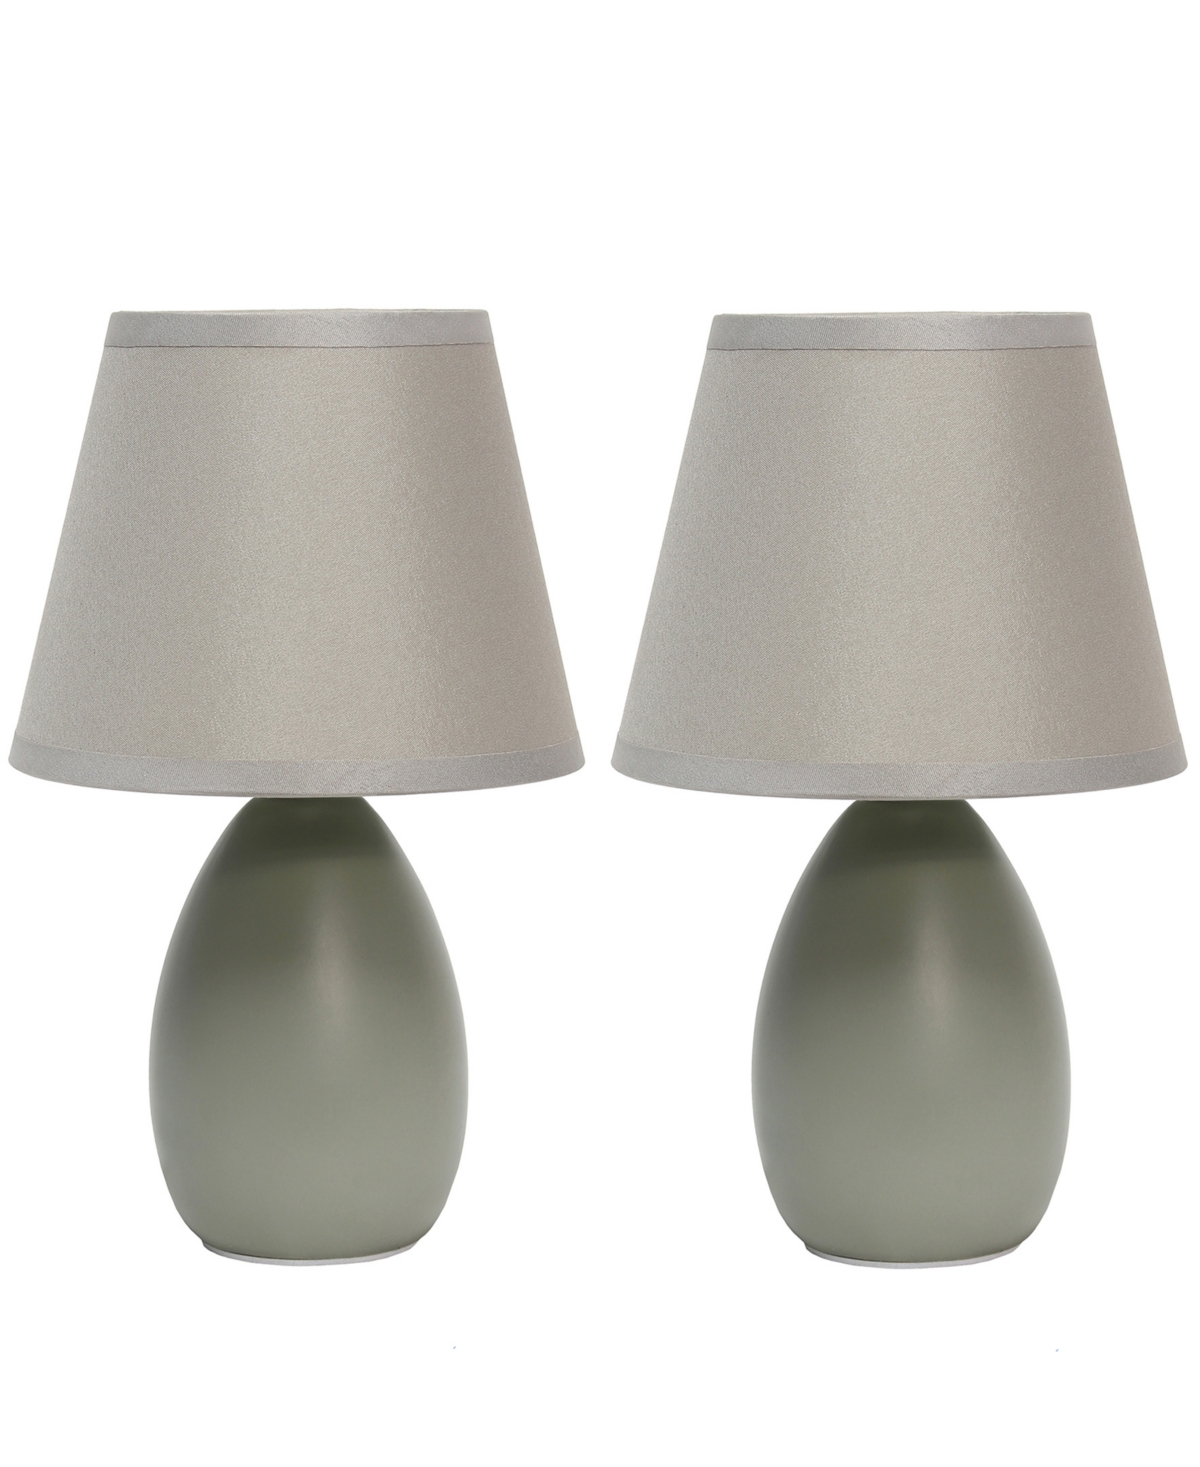 Shop Creekwood Home Nauru 9.45" Traditional Petite Ceramic Oblong Bedside Table Desk Lamp Two Pack Set, Tapered Drum Fab In Gray